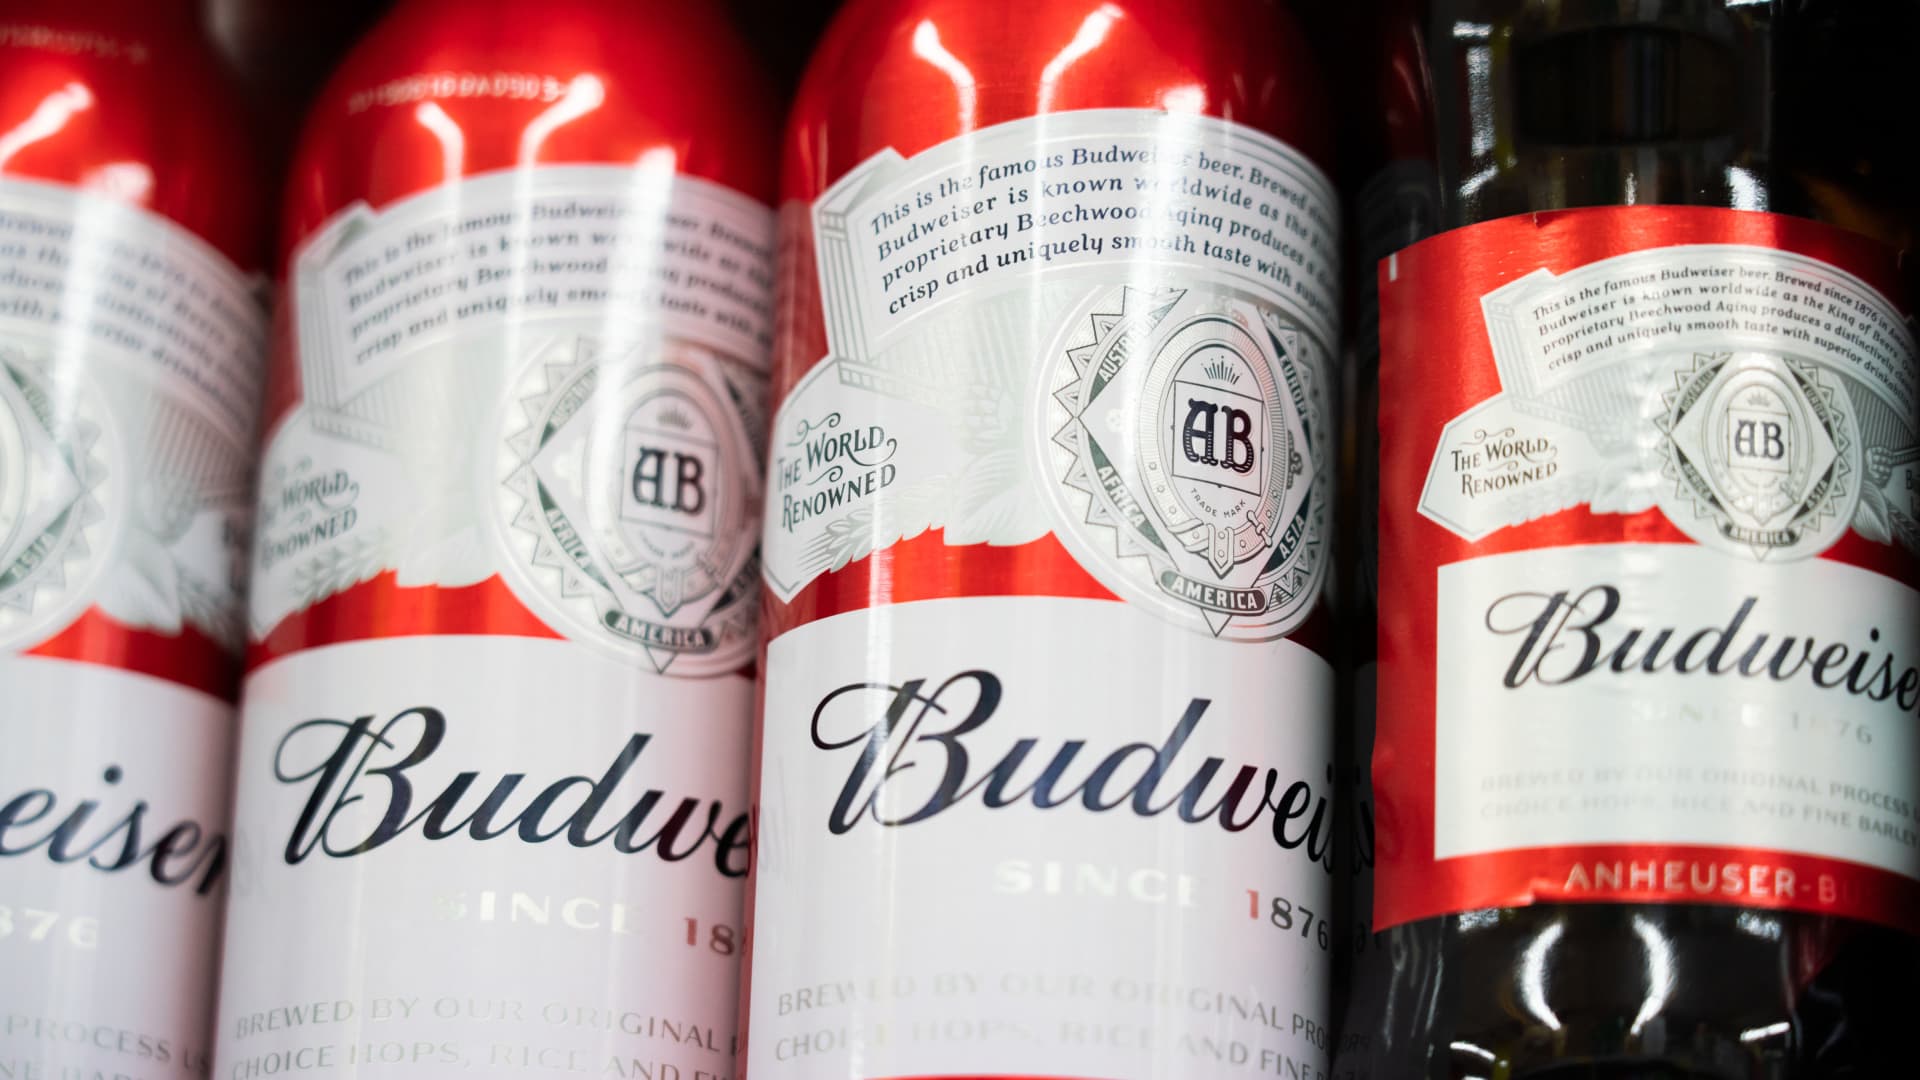 NFTS are coming for loyalty perks programs at brands like Budweiser